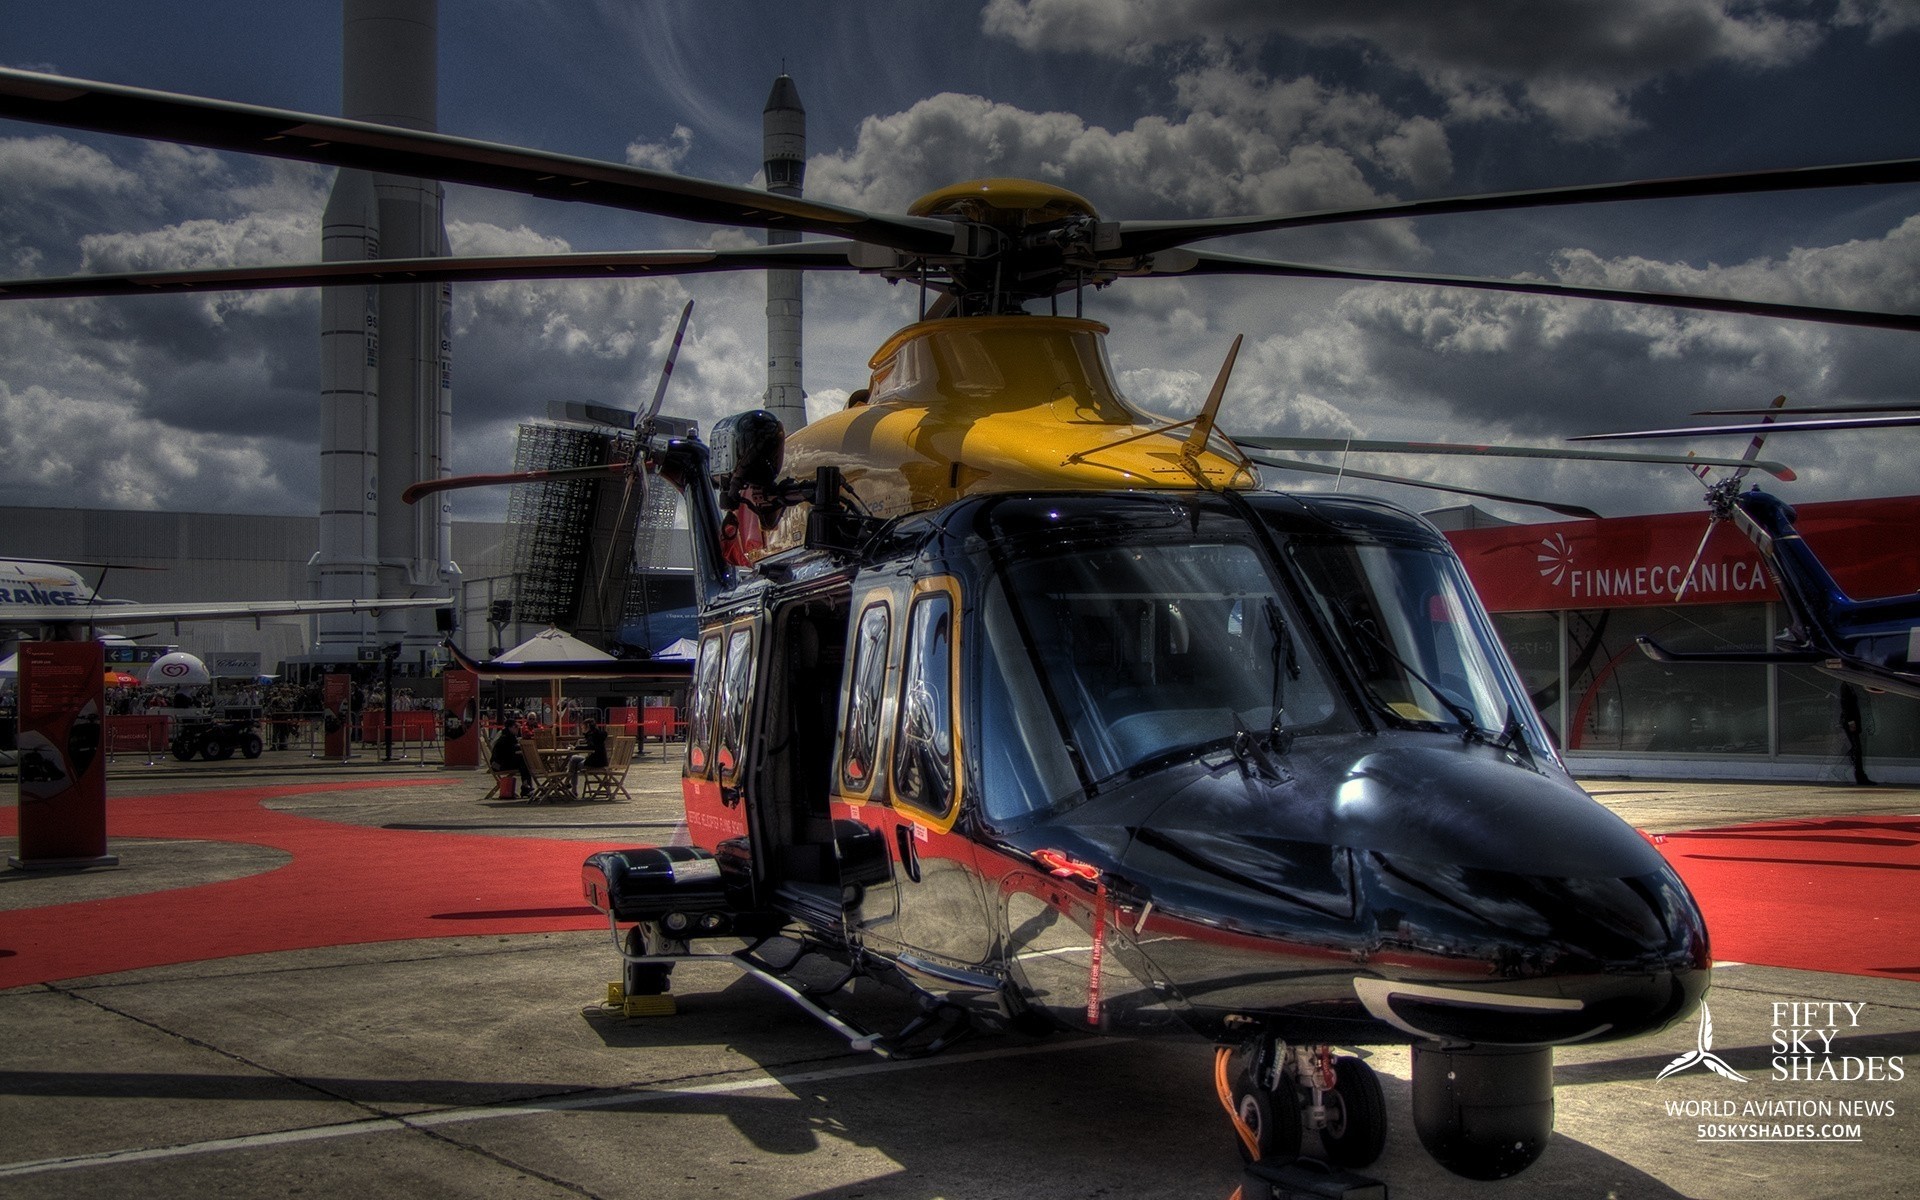 Kagoshima International Aviation orders another GrandNew EMS helicopter